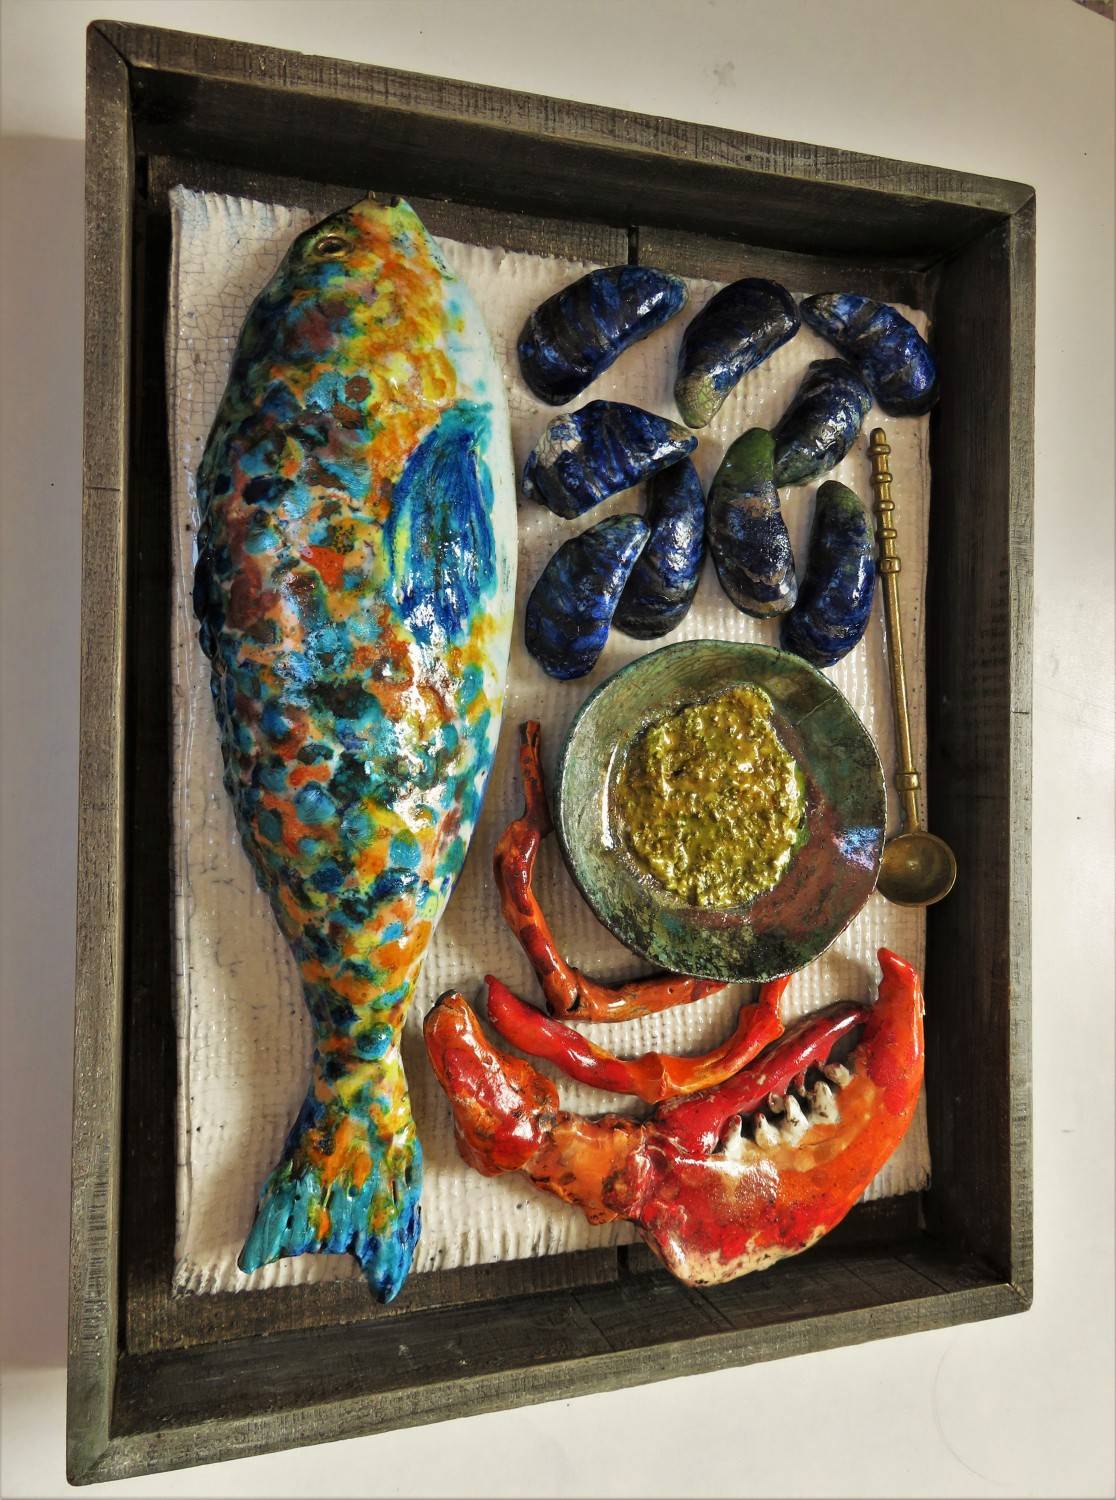 Parrot Fish, Lobster Claw & Mussels - Diana Tonnison Ceramics